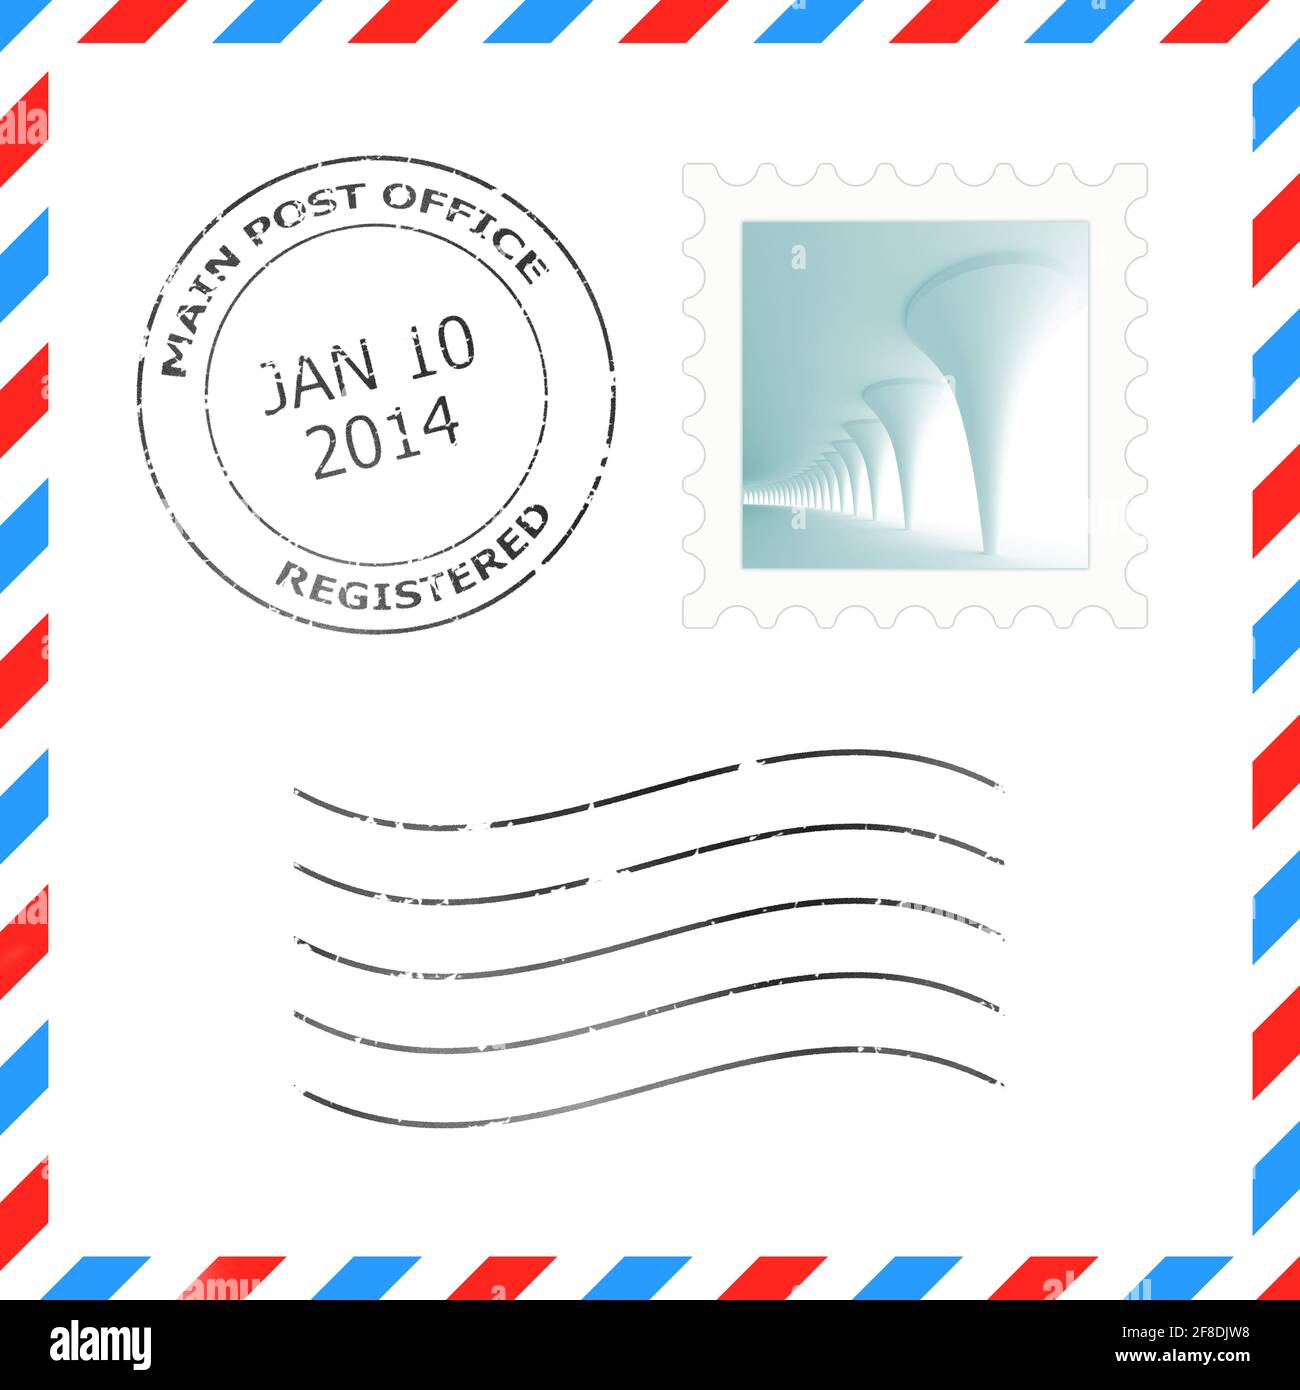 Postage stamp and postmark for a letter envelope illustrations Stock Photo